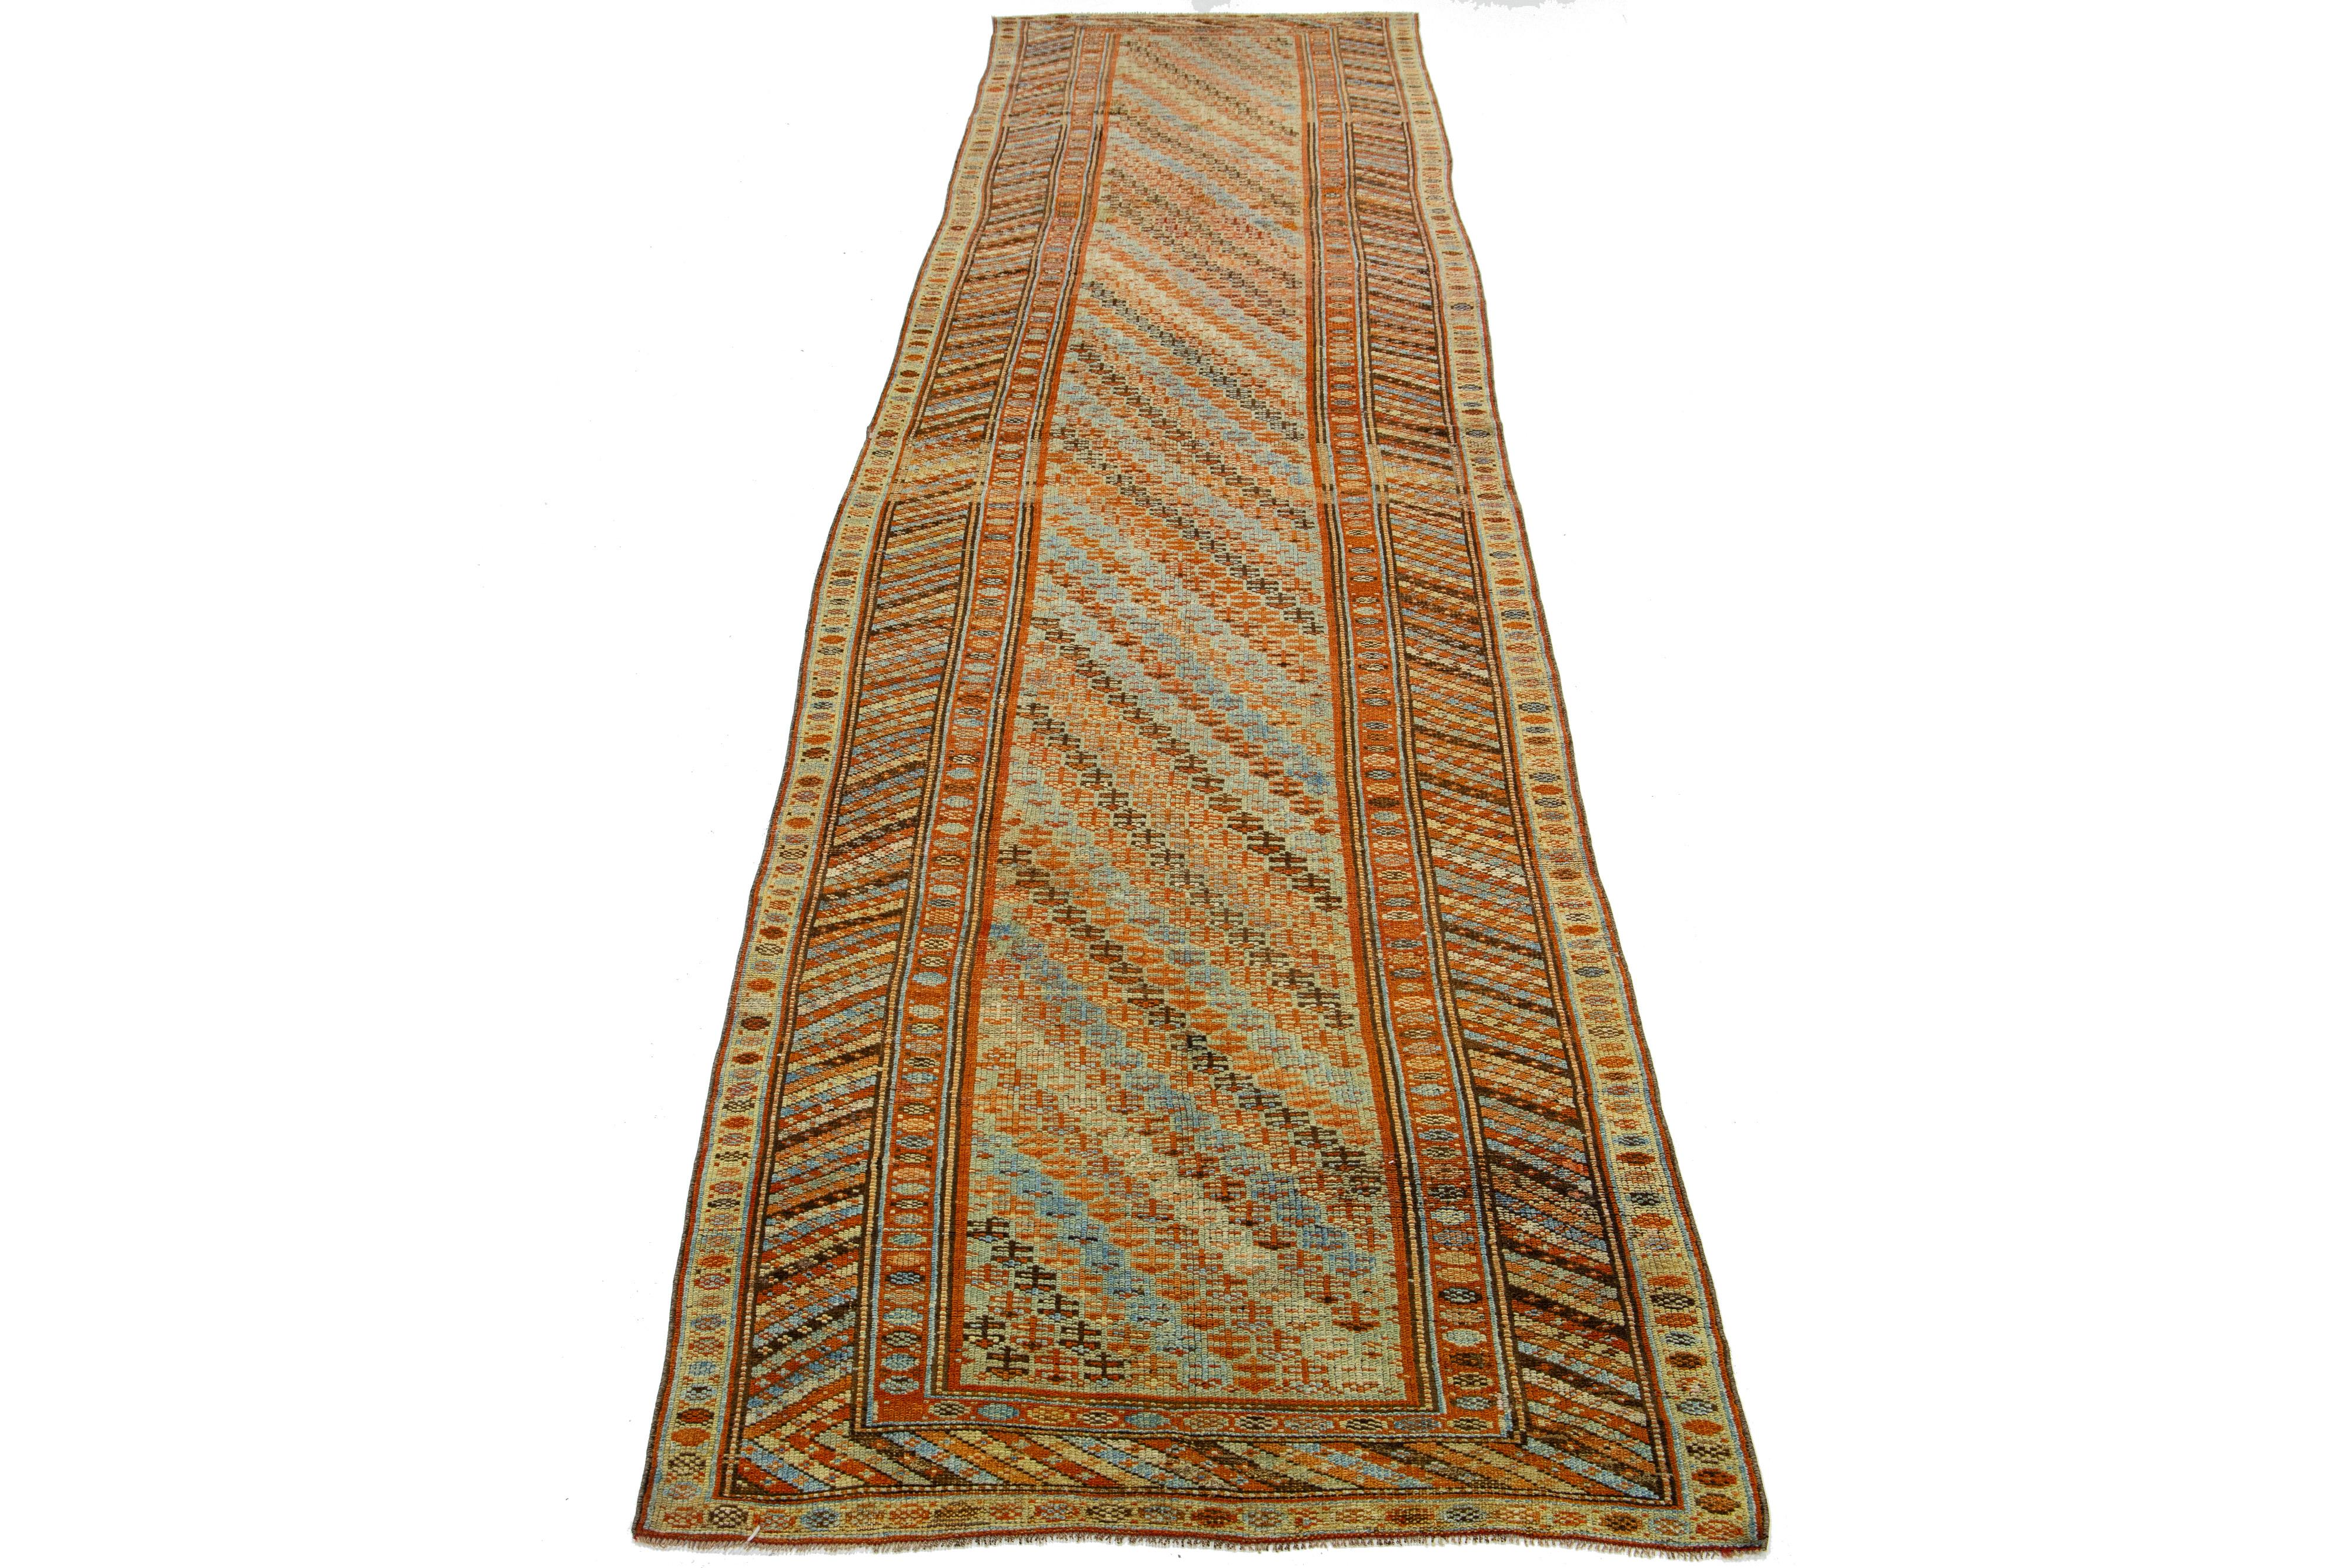 Beautiful Kurdish hand-knotted wool runner with a geometric design on a beige field. Accents of blue, orange, and brown throughout the piece. 

This rug measures 4' x 16'4